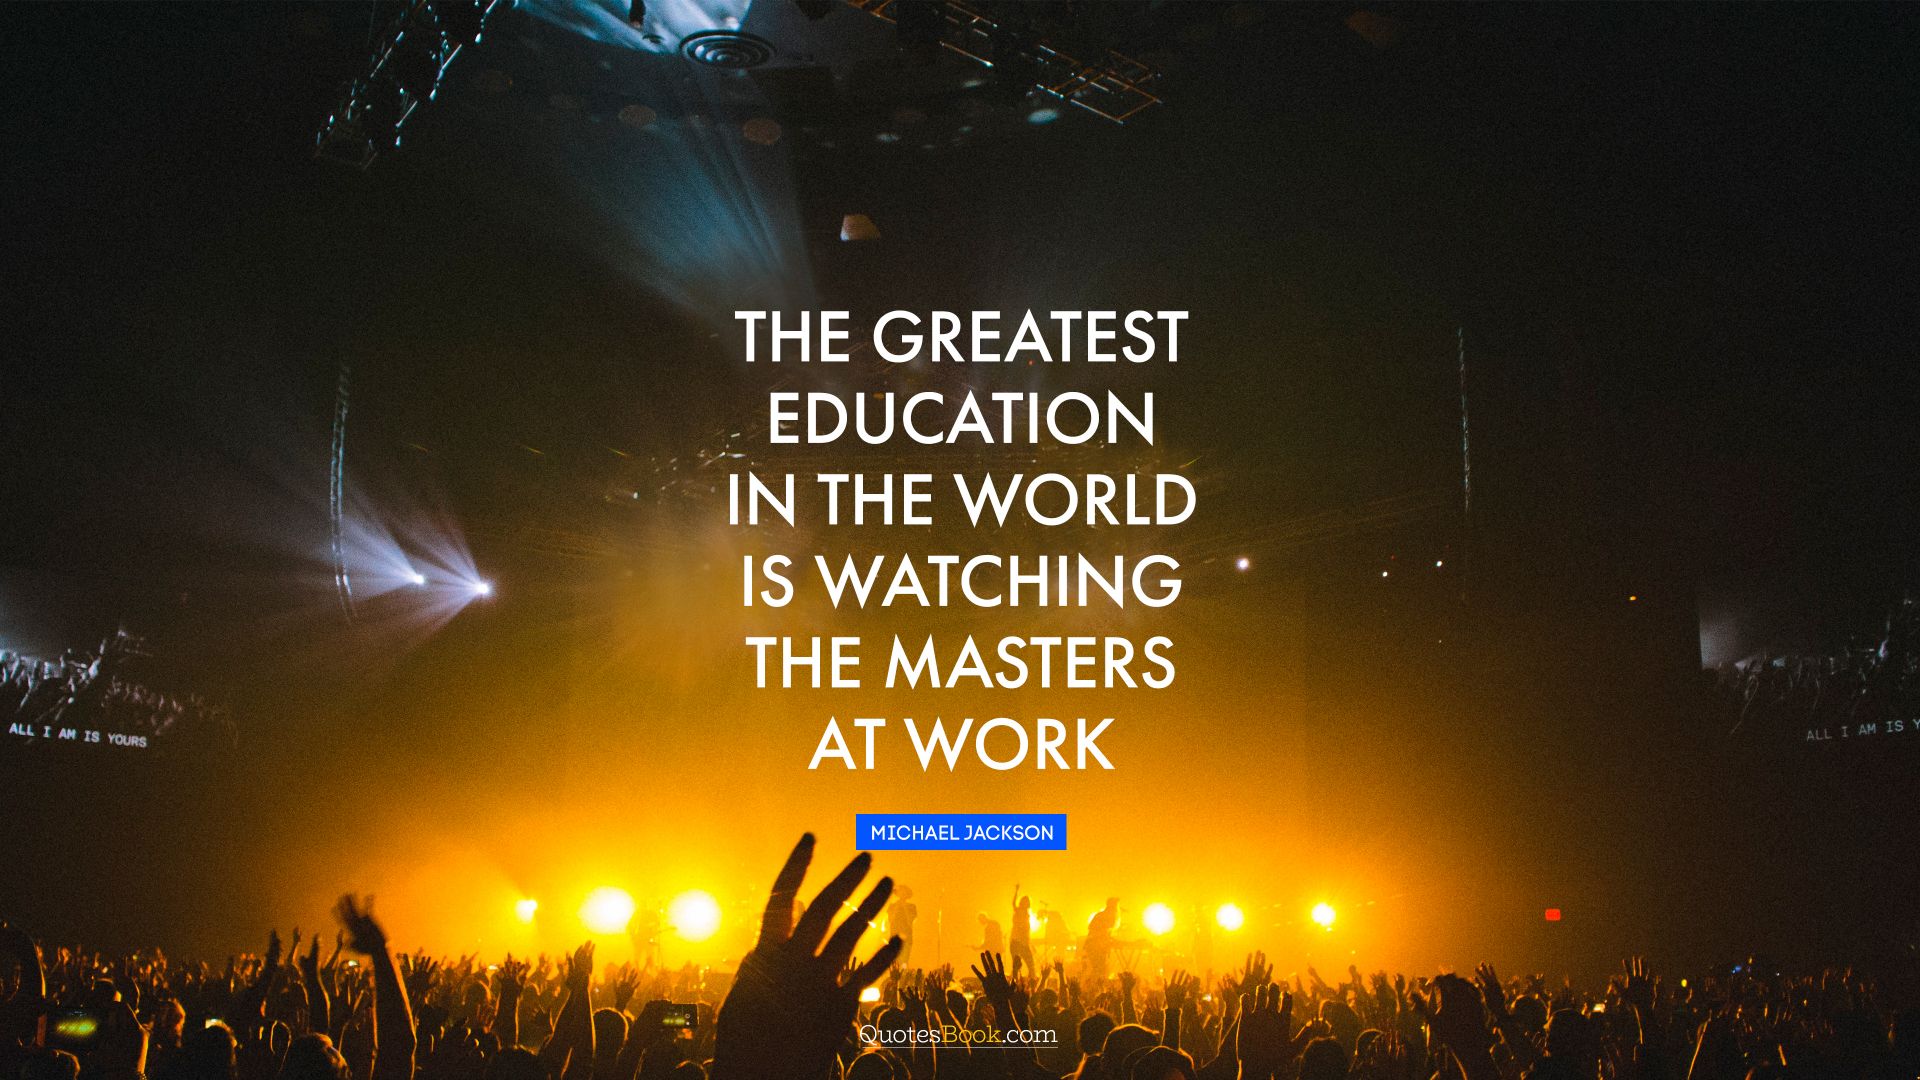 The greatest education in the world is watching the masters at work. - Quote by Michael Jackson